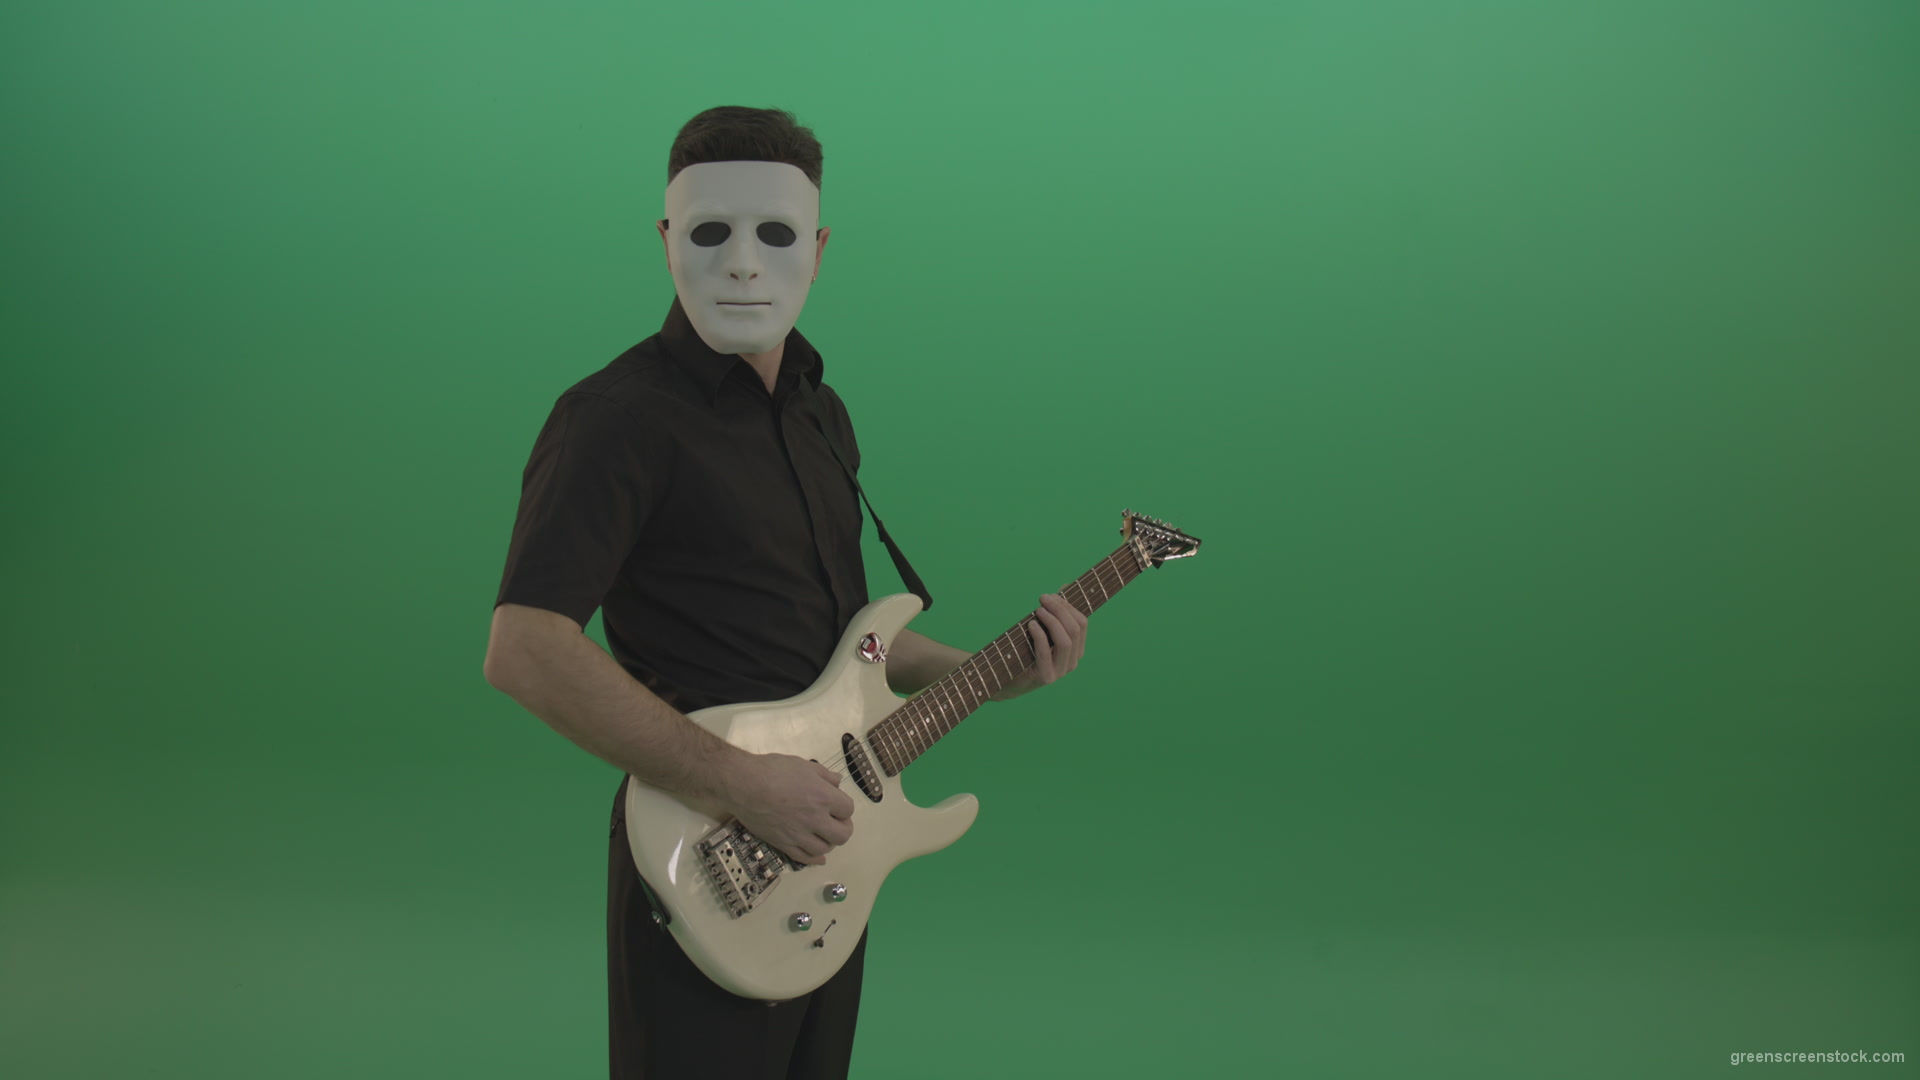 Rock-man-in-white-mask-and-black-wear-playing-guitar-isolated-on-green-screen-in-side-view_001 Green Screen Stock